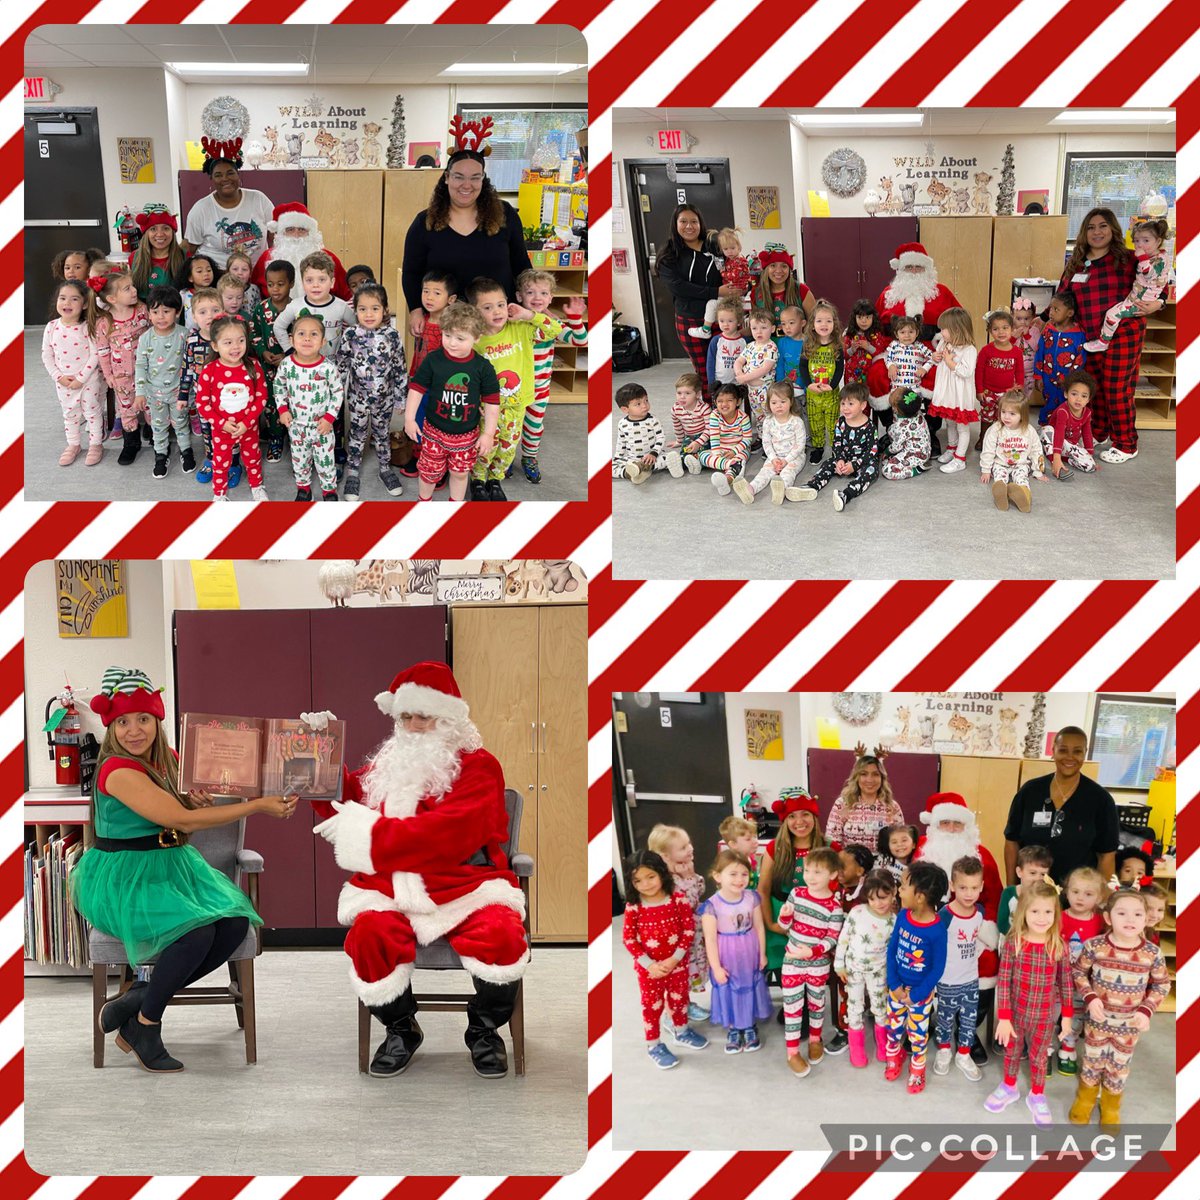 A big thank you to Santa and his special helper for coming to visit and spreading the Christmas Magic! @CFISDELC1 @CFISDELCS #ChristmasMagic #joy #Santa